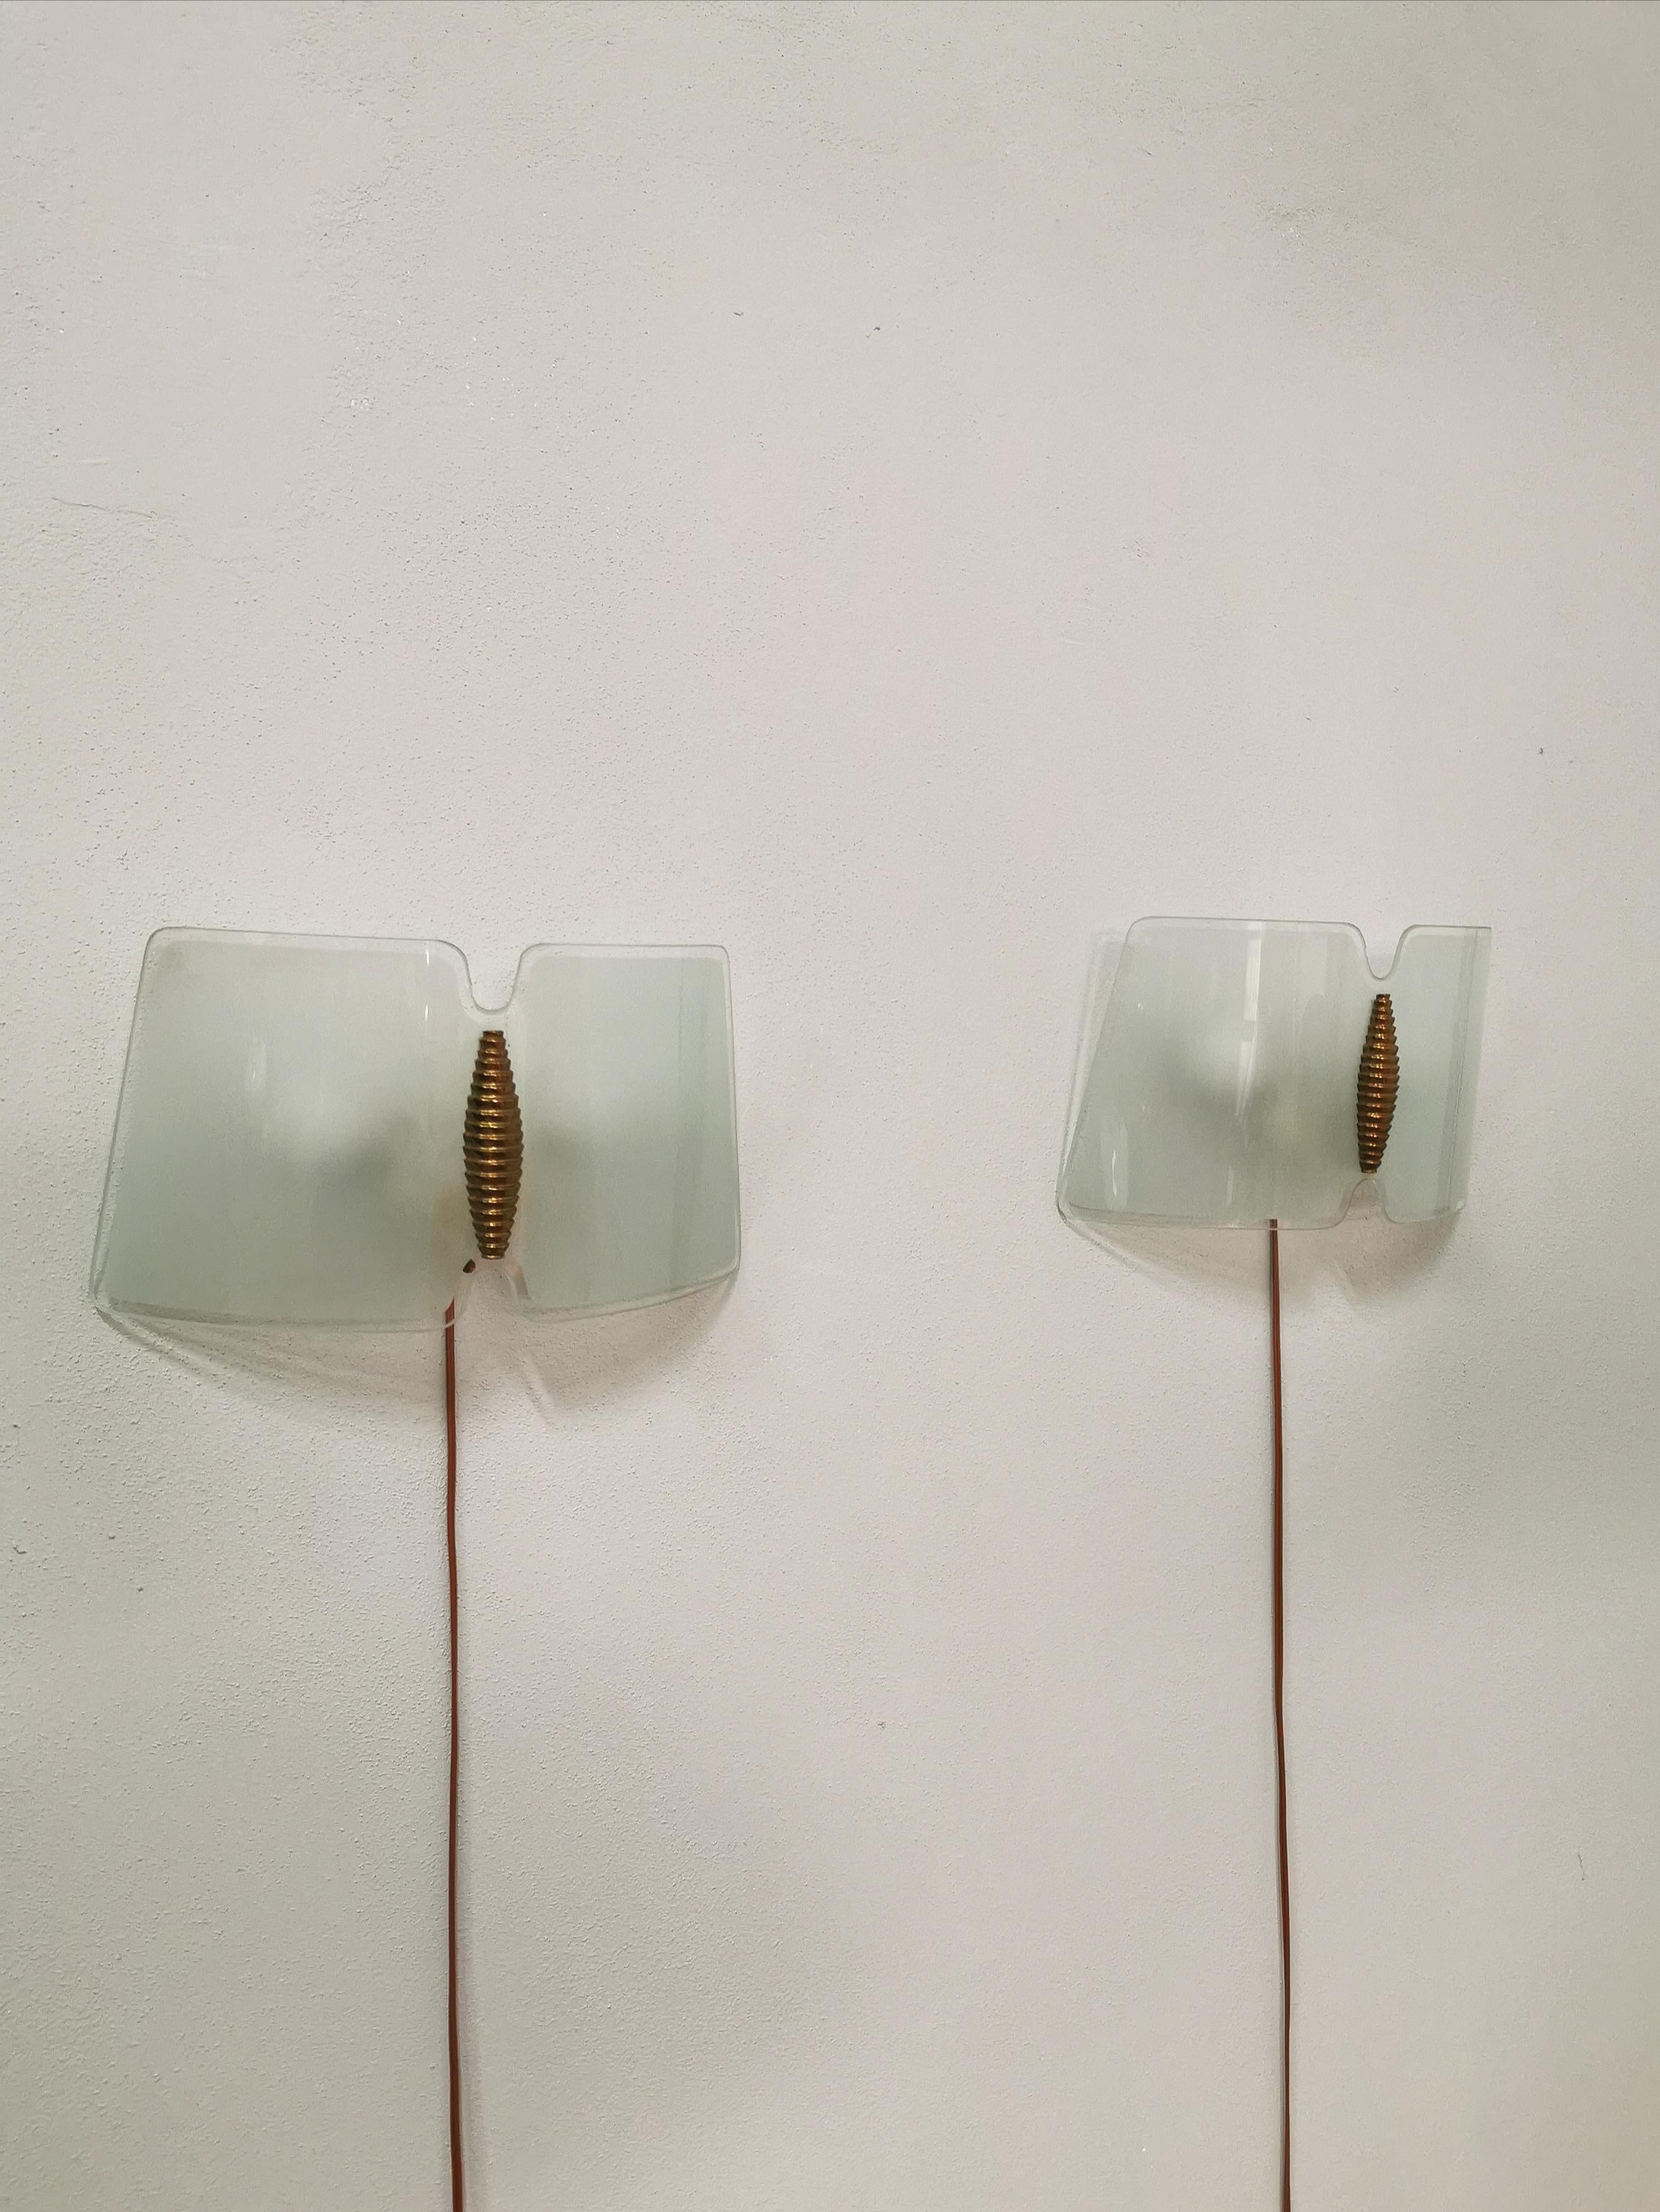 Particular and elegant set of 2 wall lamps with curved etched glass, supported by a brass structure with 2 E14 lights. Italian production of the 1950s.